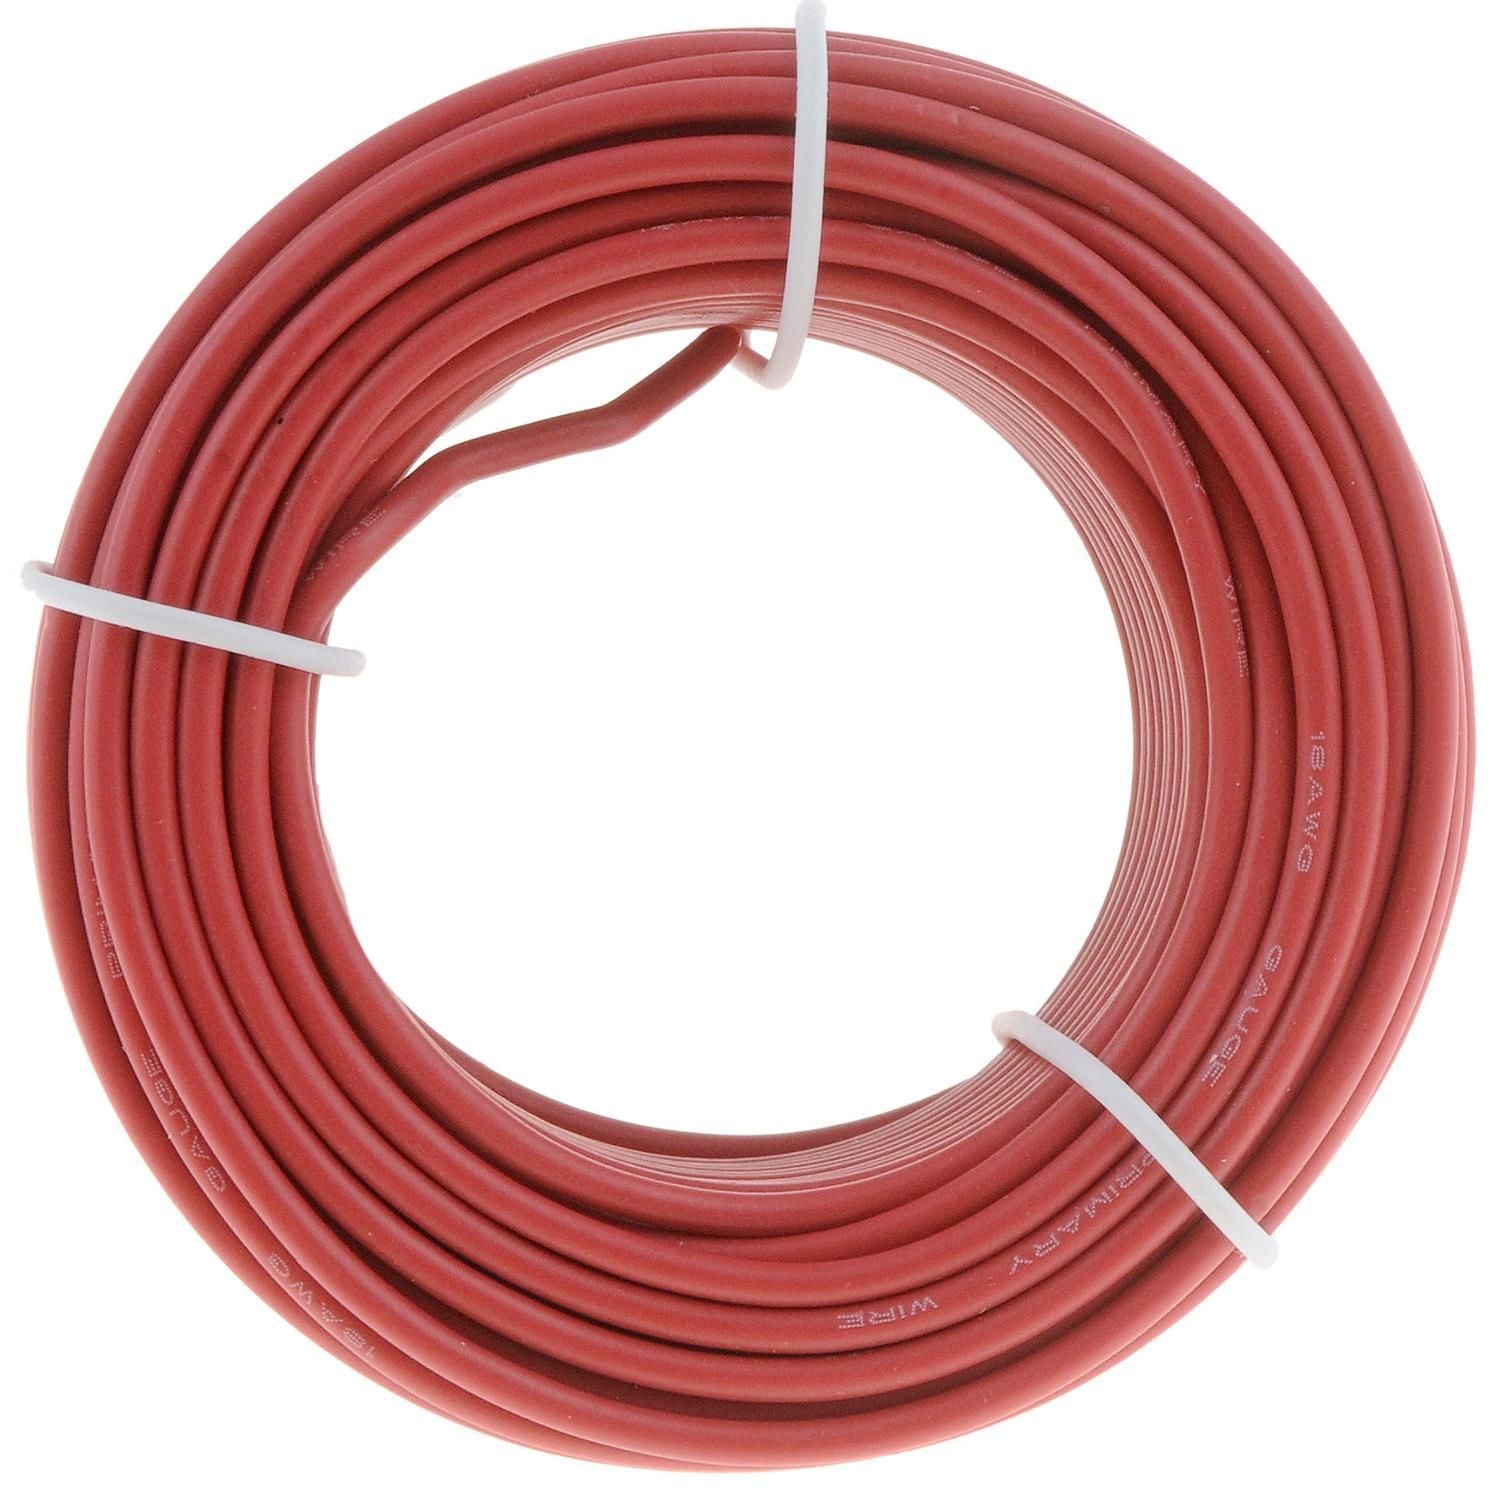 Dorman - Conduct-Tite Red 40ft 18 Gauge Primary Wire